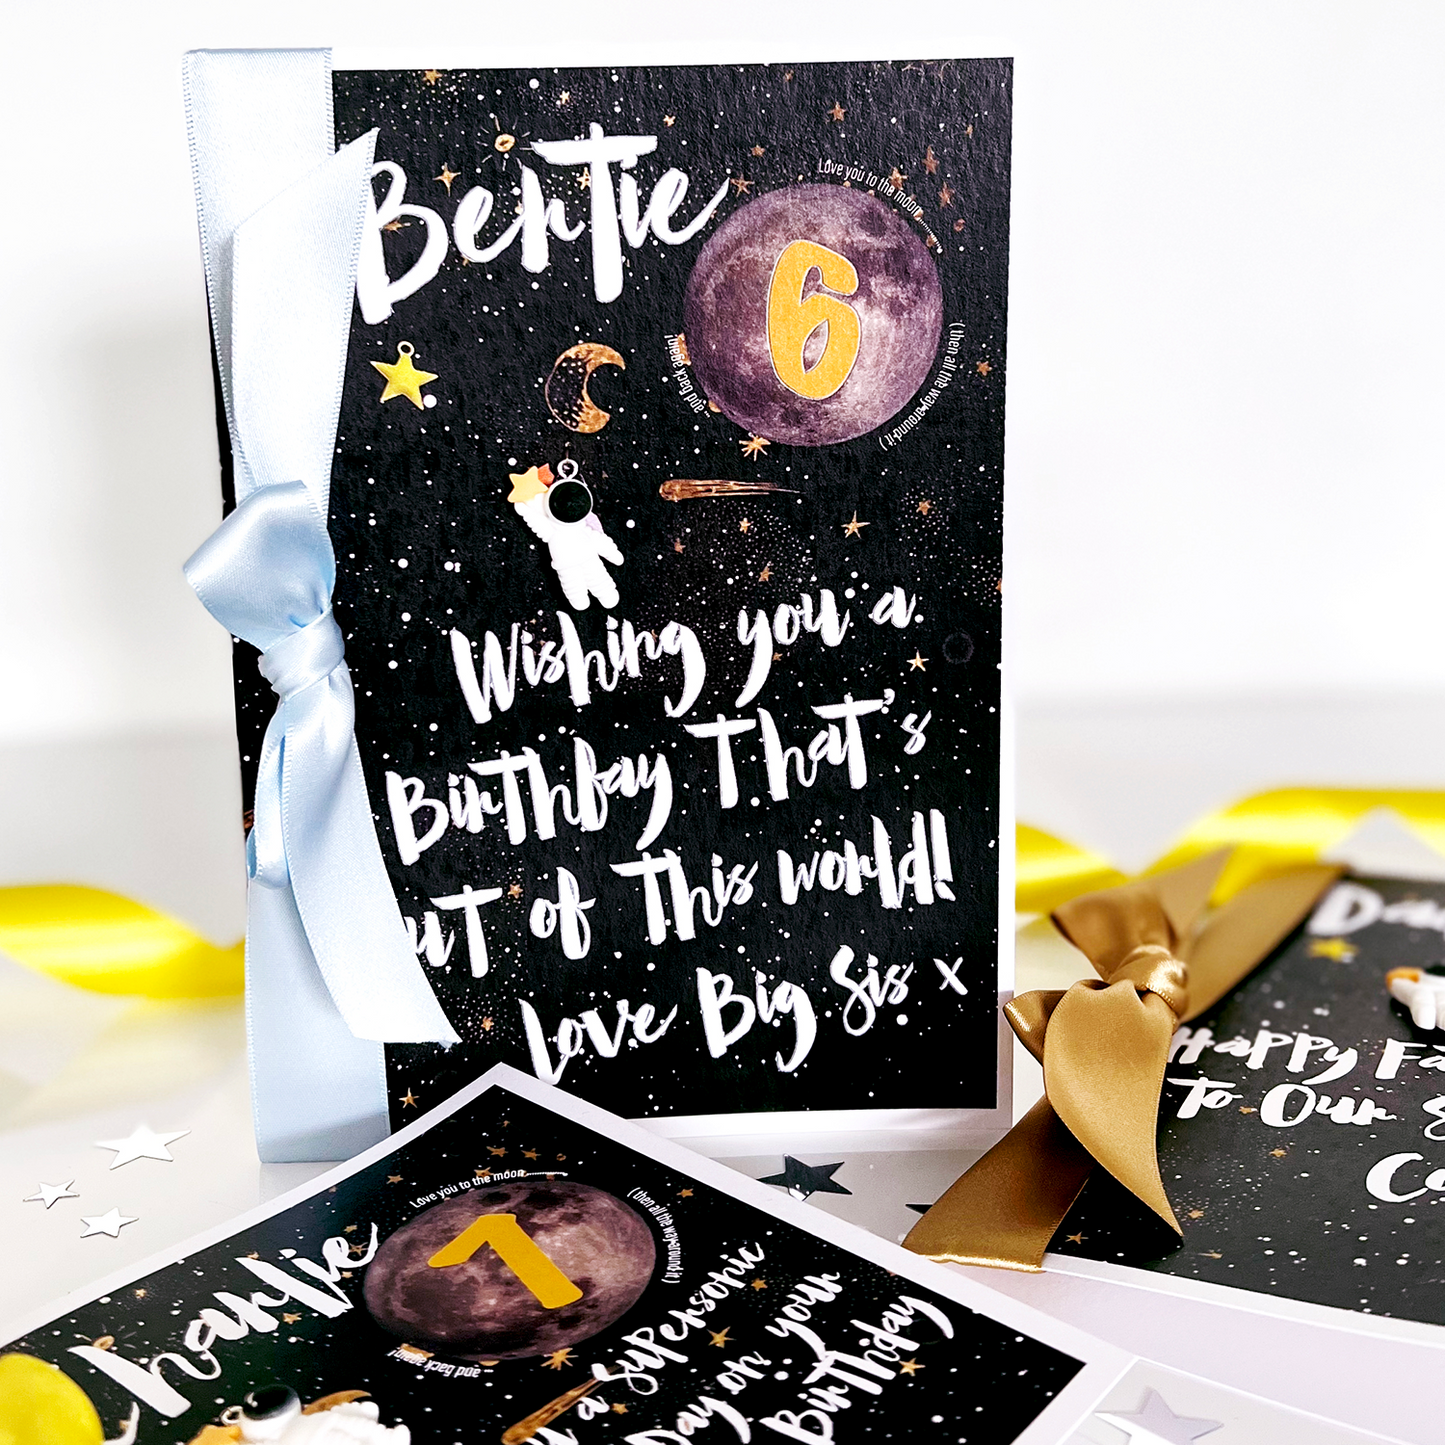 Personalised birthday card for little brother from big sister with space theme | The Luxe Co